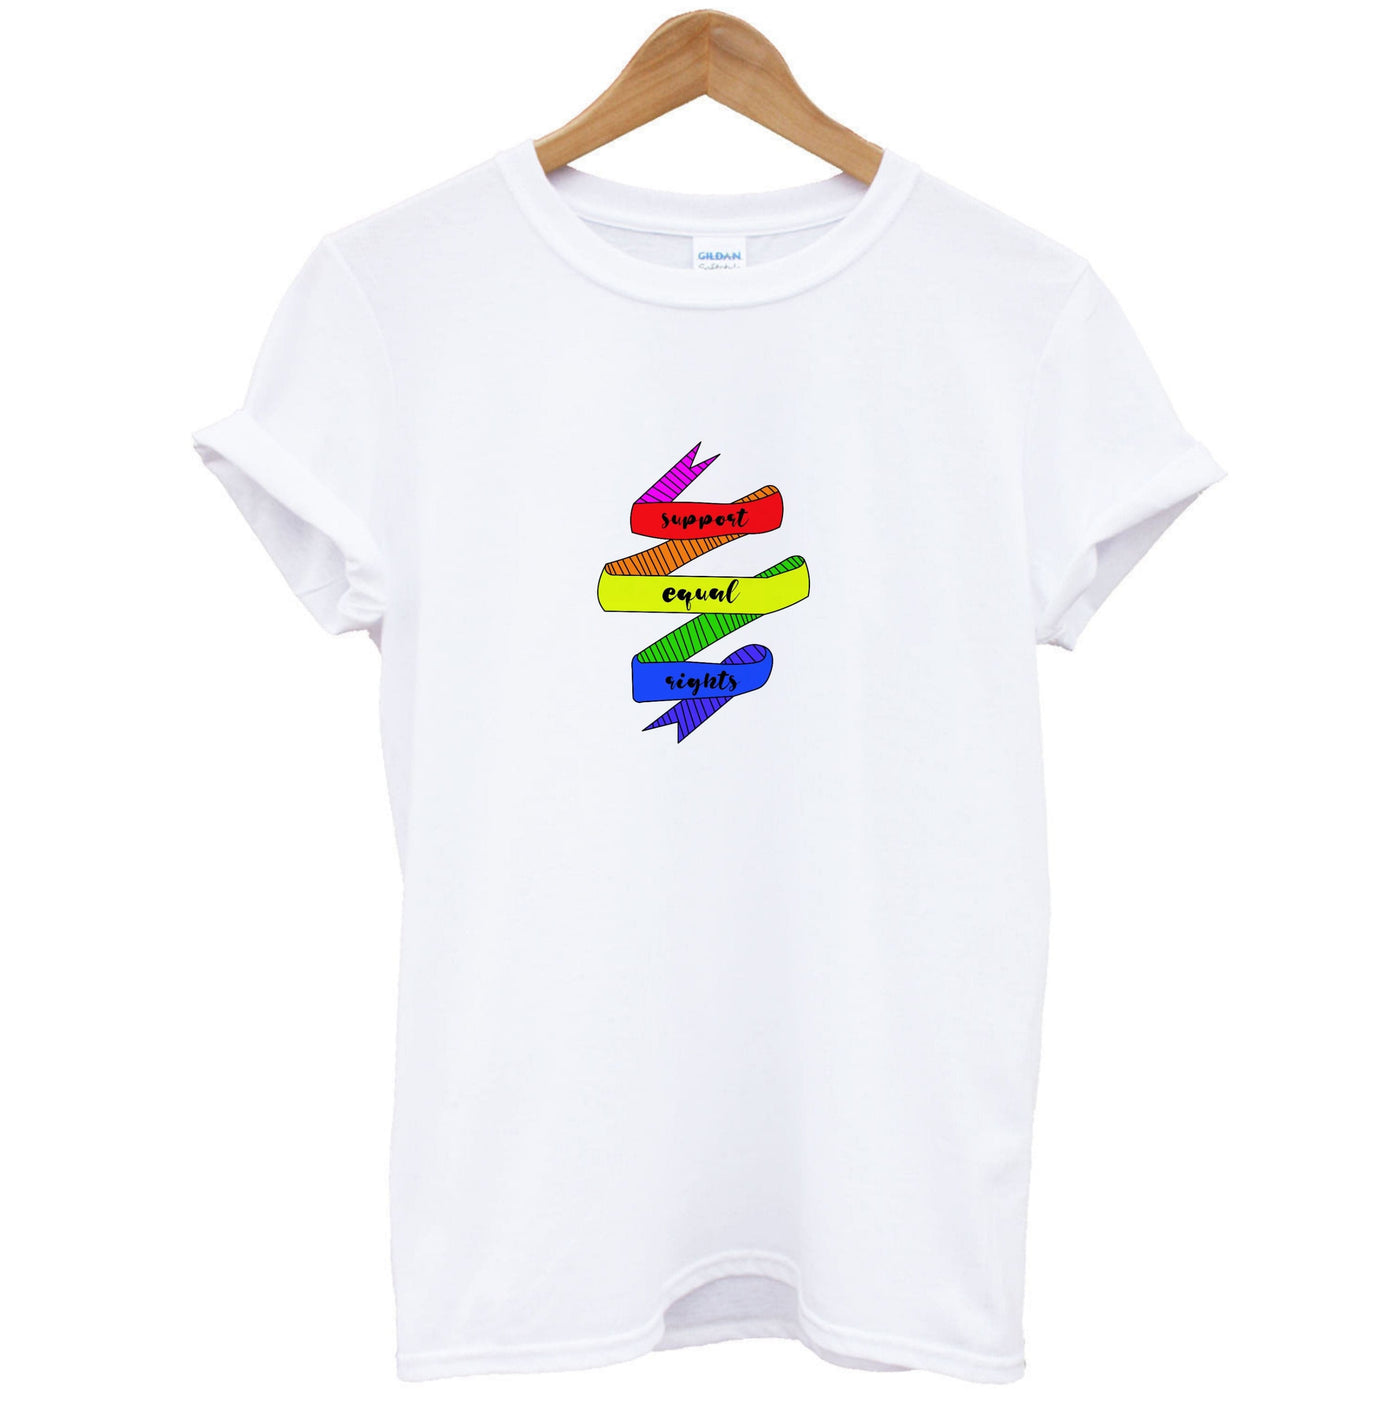 Support equal rights - Pride T-Shirt